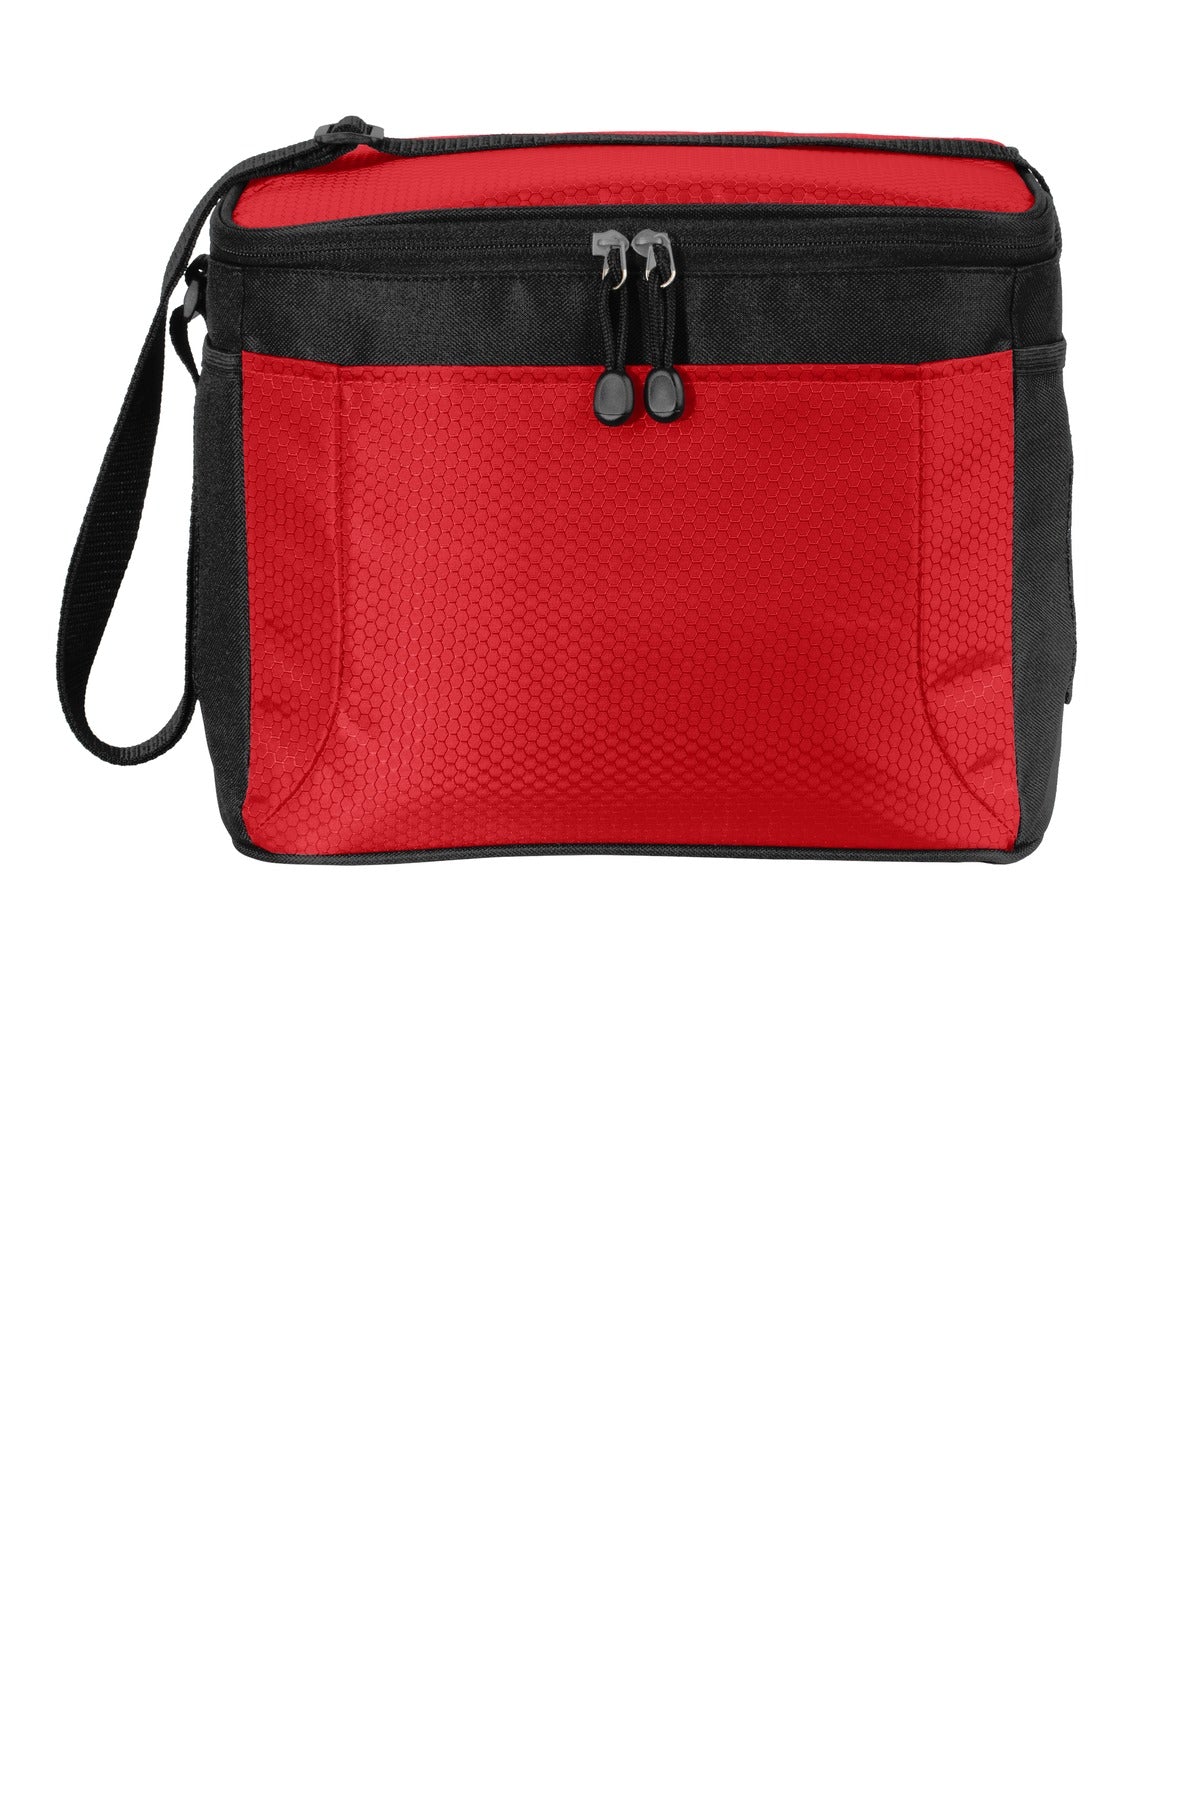 Photo of Port Authority Bags BG513  color  Red/ Black